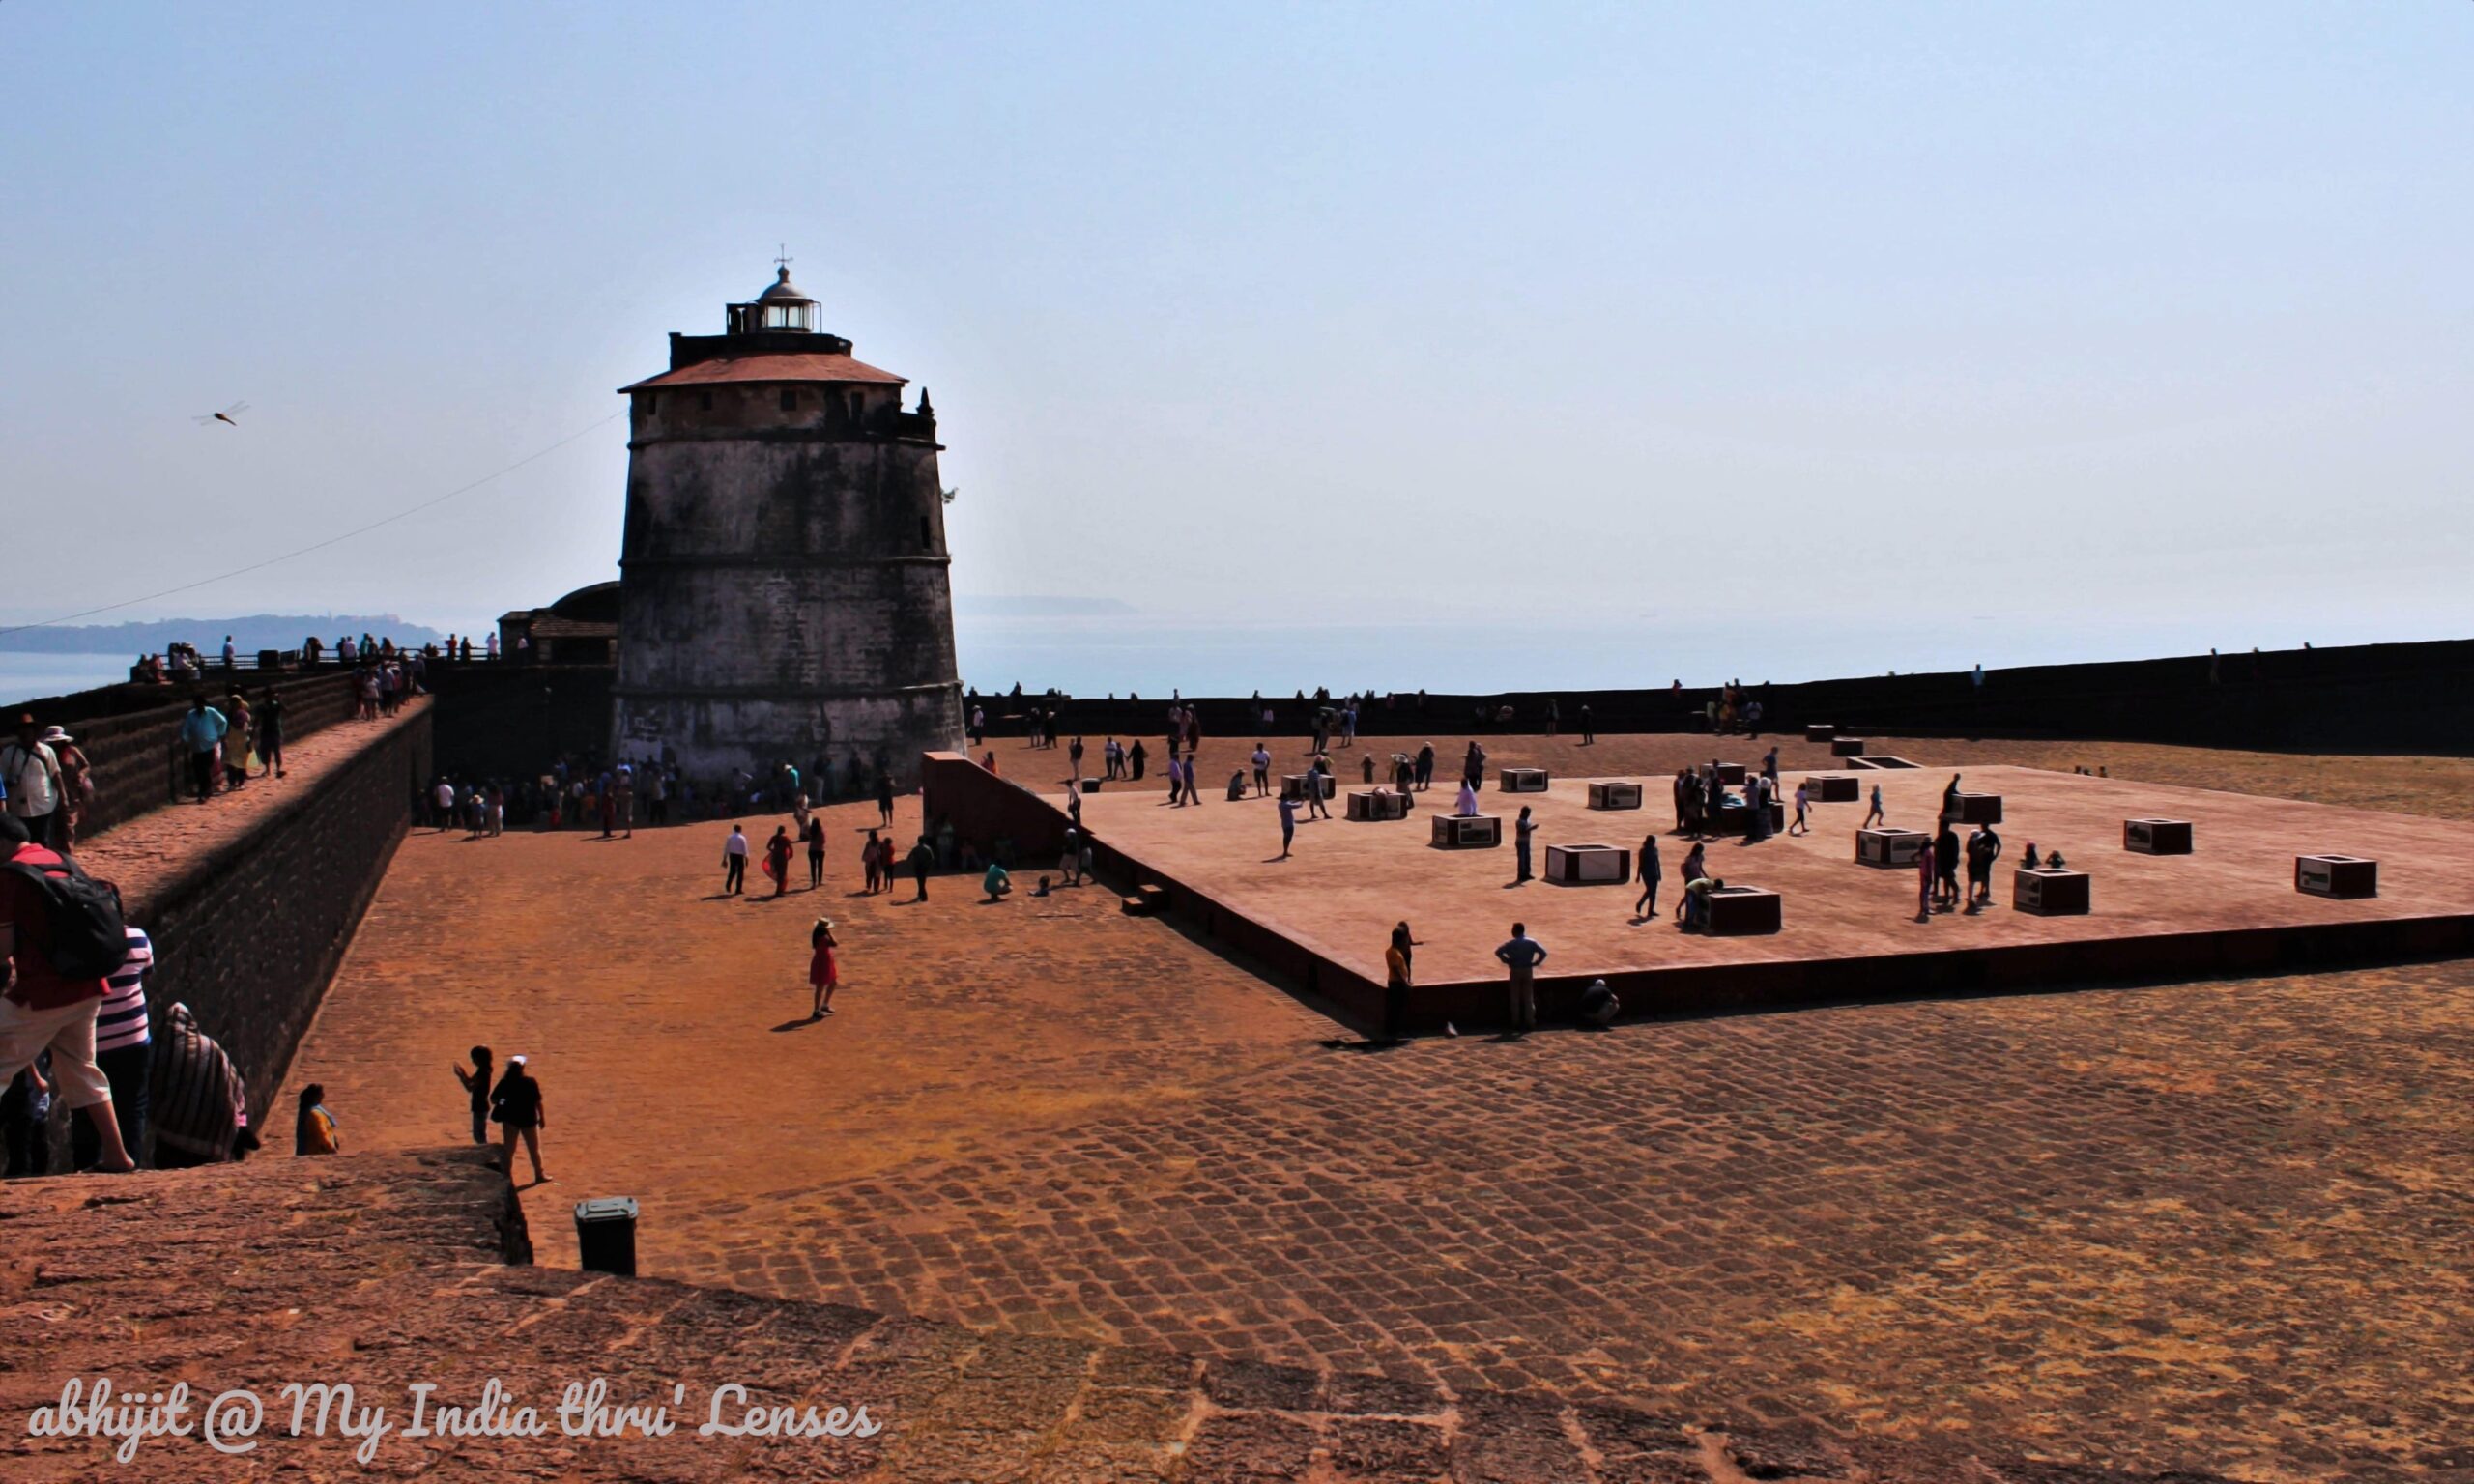 The Aguada lighthouse located at one of the corners of the open area